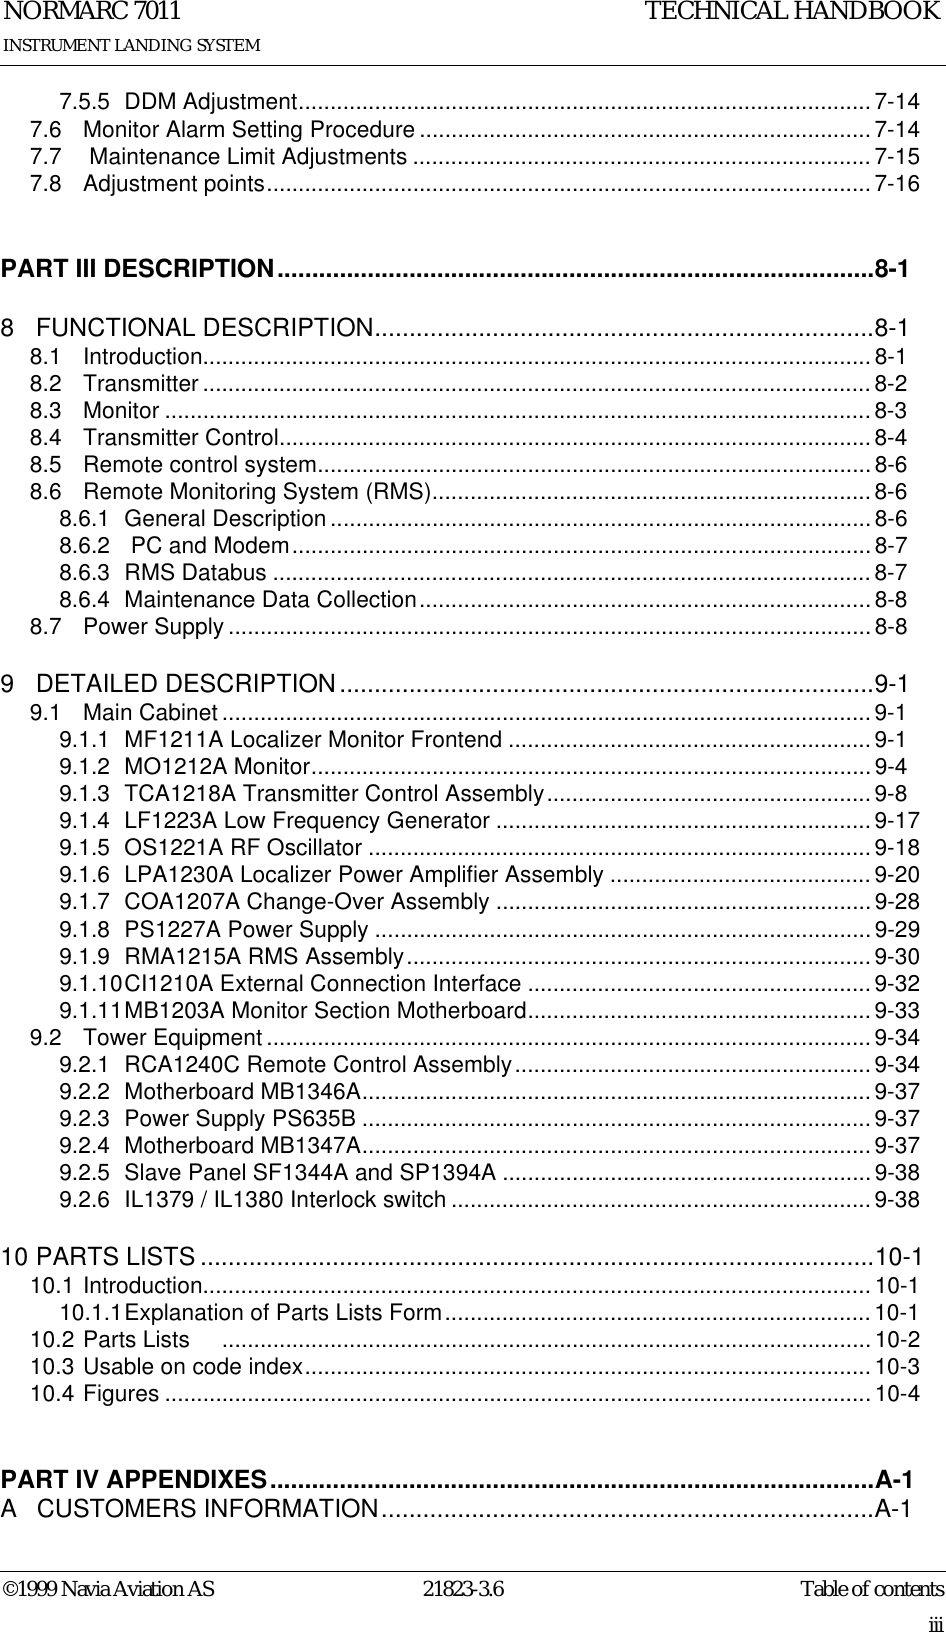 Table of contentsNORMARC 701121823-3.6iii©1999 Navia Aviation ASINSTRUMENT LANDING SYSTEMTECHNICAL HANDBOOK7.5.5 DDM Adjustment.......................................................................................... 7-147.6 Monitor Alarm Setting Procedure.......................................................................7-147.7  Maintenance Limit Adjustments ........................................................................7-157.8 Adjustment points............................................................................................... 7-16PART III DESCRIPTION......................................................................................8-18 FUNCTIONAL DESCRIPTION........................................................................8-18.1 Introduction......................................................................................................... 8-18.2 Transmitter ......................................................................................................... 8-28.3 Monitor ............................................................................................................... 8-38.4 Transmitter Control............................................................................................. 8-48.5 Remote control system.......................................................................................8-68.6 Remote Monitoring System (RMS)..................................................................... 8-68.6.1 General Description ..................................................................................... 8-68.6.2  PC and Modem...........................................................................................8-78.6.3 RMS Databus .............................................................................................. 8-78.6.4 Maintenance Data Collection.......................................................................8-88.7 Power Supply .....................................................................................................8-89 DETAILED DESCRIPTION.............................................................................9-19.1 Main Cabinet ...................................................................................................... 9-19.1.1 MF1211A Localizer Monitor Frontend ......................................................... 9-19.1.2 MO1212A Monitor........................................................................................9-49.1.3 TCA1218A Transmitter Control Assembly...................................................9-89.1.4 LF1223A Low Frequency Generator ...........................................................9-179.1.5 OS1221A RF Oscillator ............................................................................... 9-189.1.6 LPA1230A Localizer Power Amplifier Assembly ......................................... 9-209.1.7 COA1207A Change-Over Assembly ...........................................................9-289.1.8 PS1227A Power Supply ..............................................................................9-299.1.9 RMA1215A RMS Assembly.........................................................................9-309.1.10CI1210A External Connection Interface ......................................................9-329.1.11MB1203A Monitor Section Motherboard......................................................9-339.2 Tower Equipment ............................................................................................... 9-349.2.1 RCA1240C Remote Control Assembly........................................................ 9-349.2.2 Motherboard MB1346A................................................................................9-379.2.3 Power Supply PS635B ................................................................................9-379.2.4 Motherboard MB1347A................................................................................9-379.2.5 Slave Panel SF1344A and SP1394A ..........................................................9-389.2.6 IL1379 / IL1380 Interlock switch ..................................................................9-3810 PARTS LISTS .................................................................................................10-110.1 Introduction......................................................................................................... 10-110.1.1Explanation of Parts Lists Form................................................................... 10-110.2 Parts Lists     ...................................................................................................... 10-210.3 Usable on code index.........................................................................................10-310.4 Figures ............................................................................................................... 10-4PART IV APPENDIXES.......................................................................................A-1A  CUSTOMERS INFORMATION.......................................................................A-1